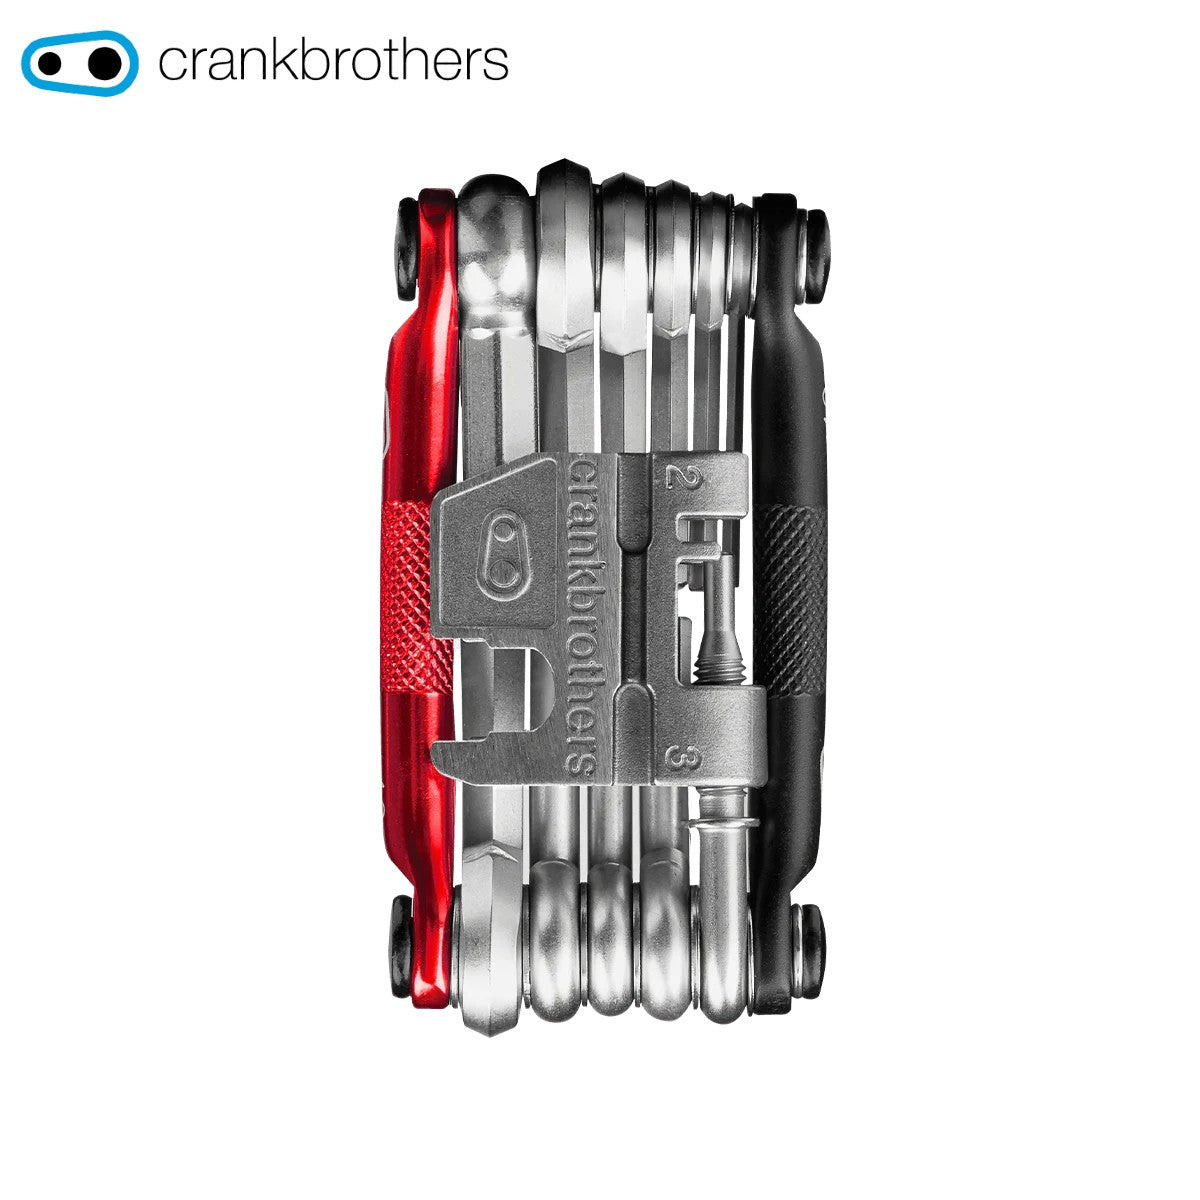 Crankbrothers M17 Multi-Tool with Chain Breaker - Black/Red